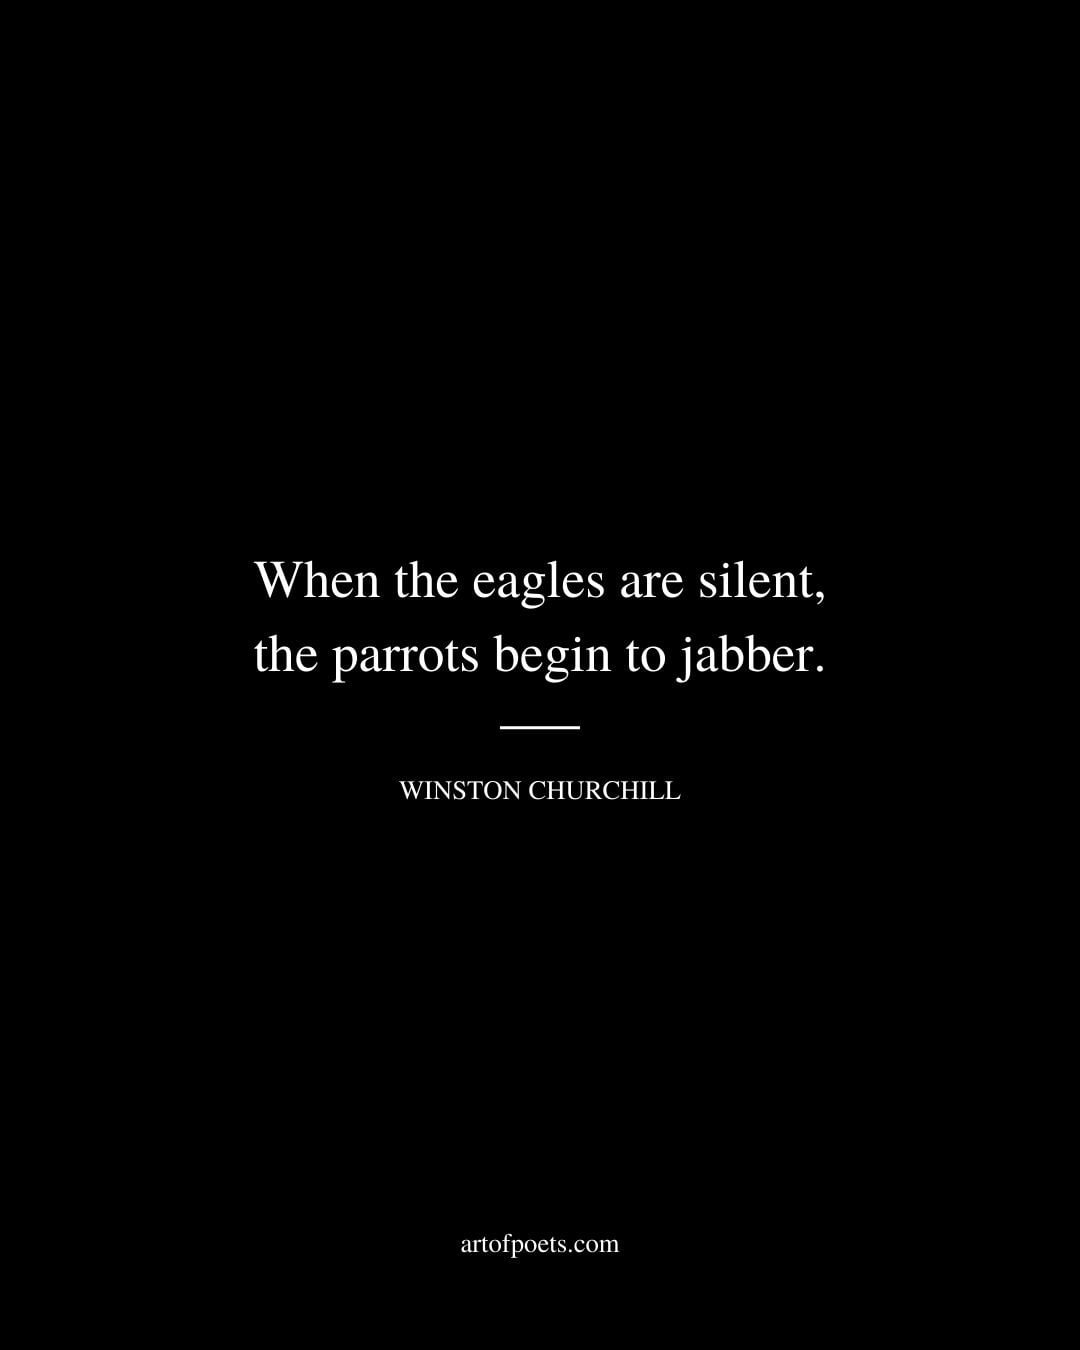 When the eagles are silent the parrots begin to jabber